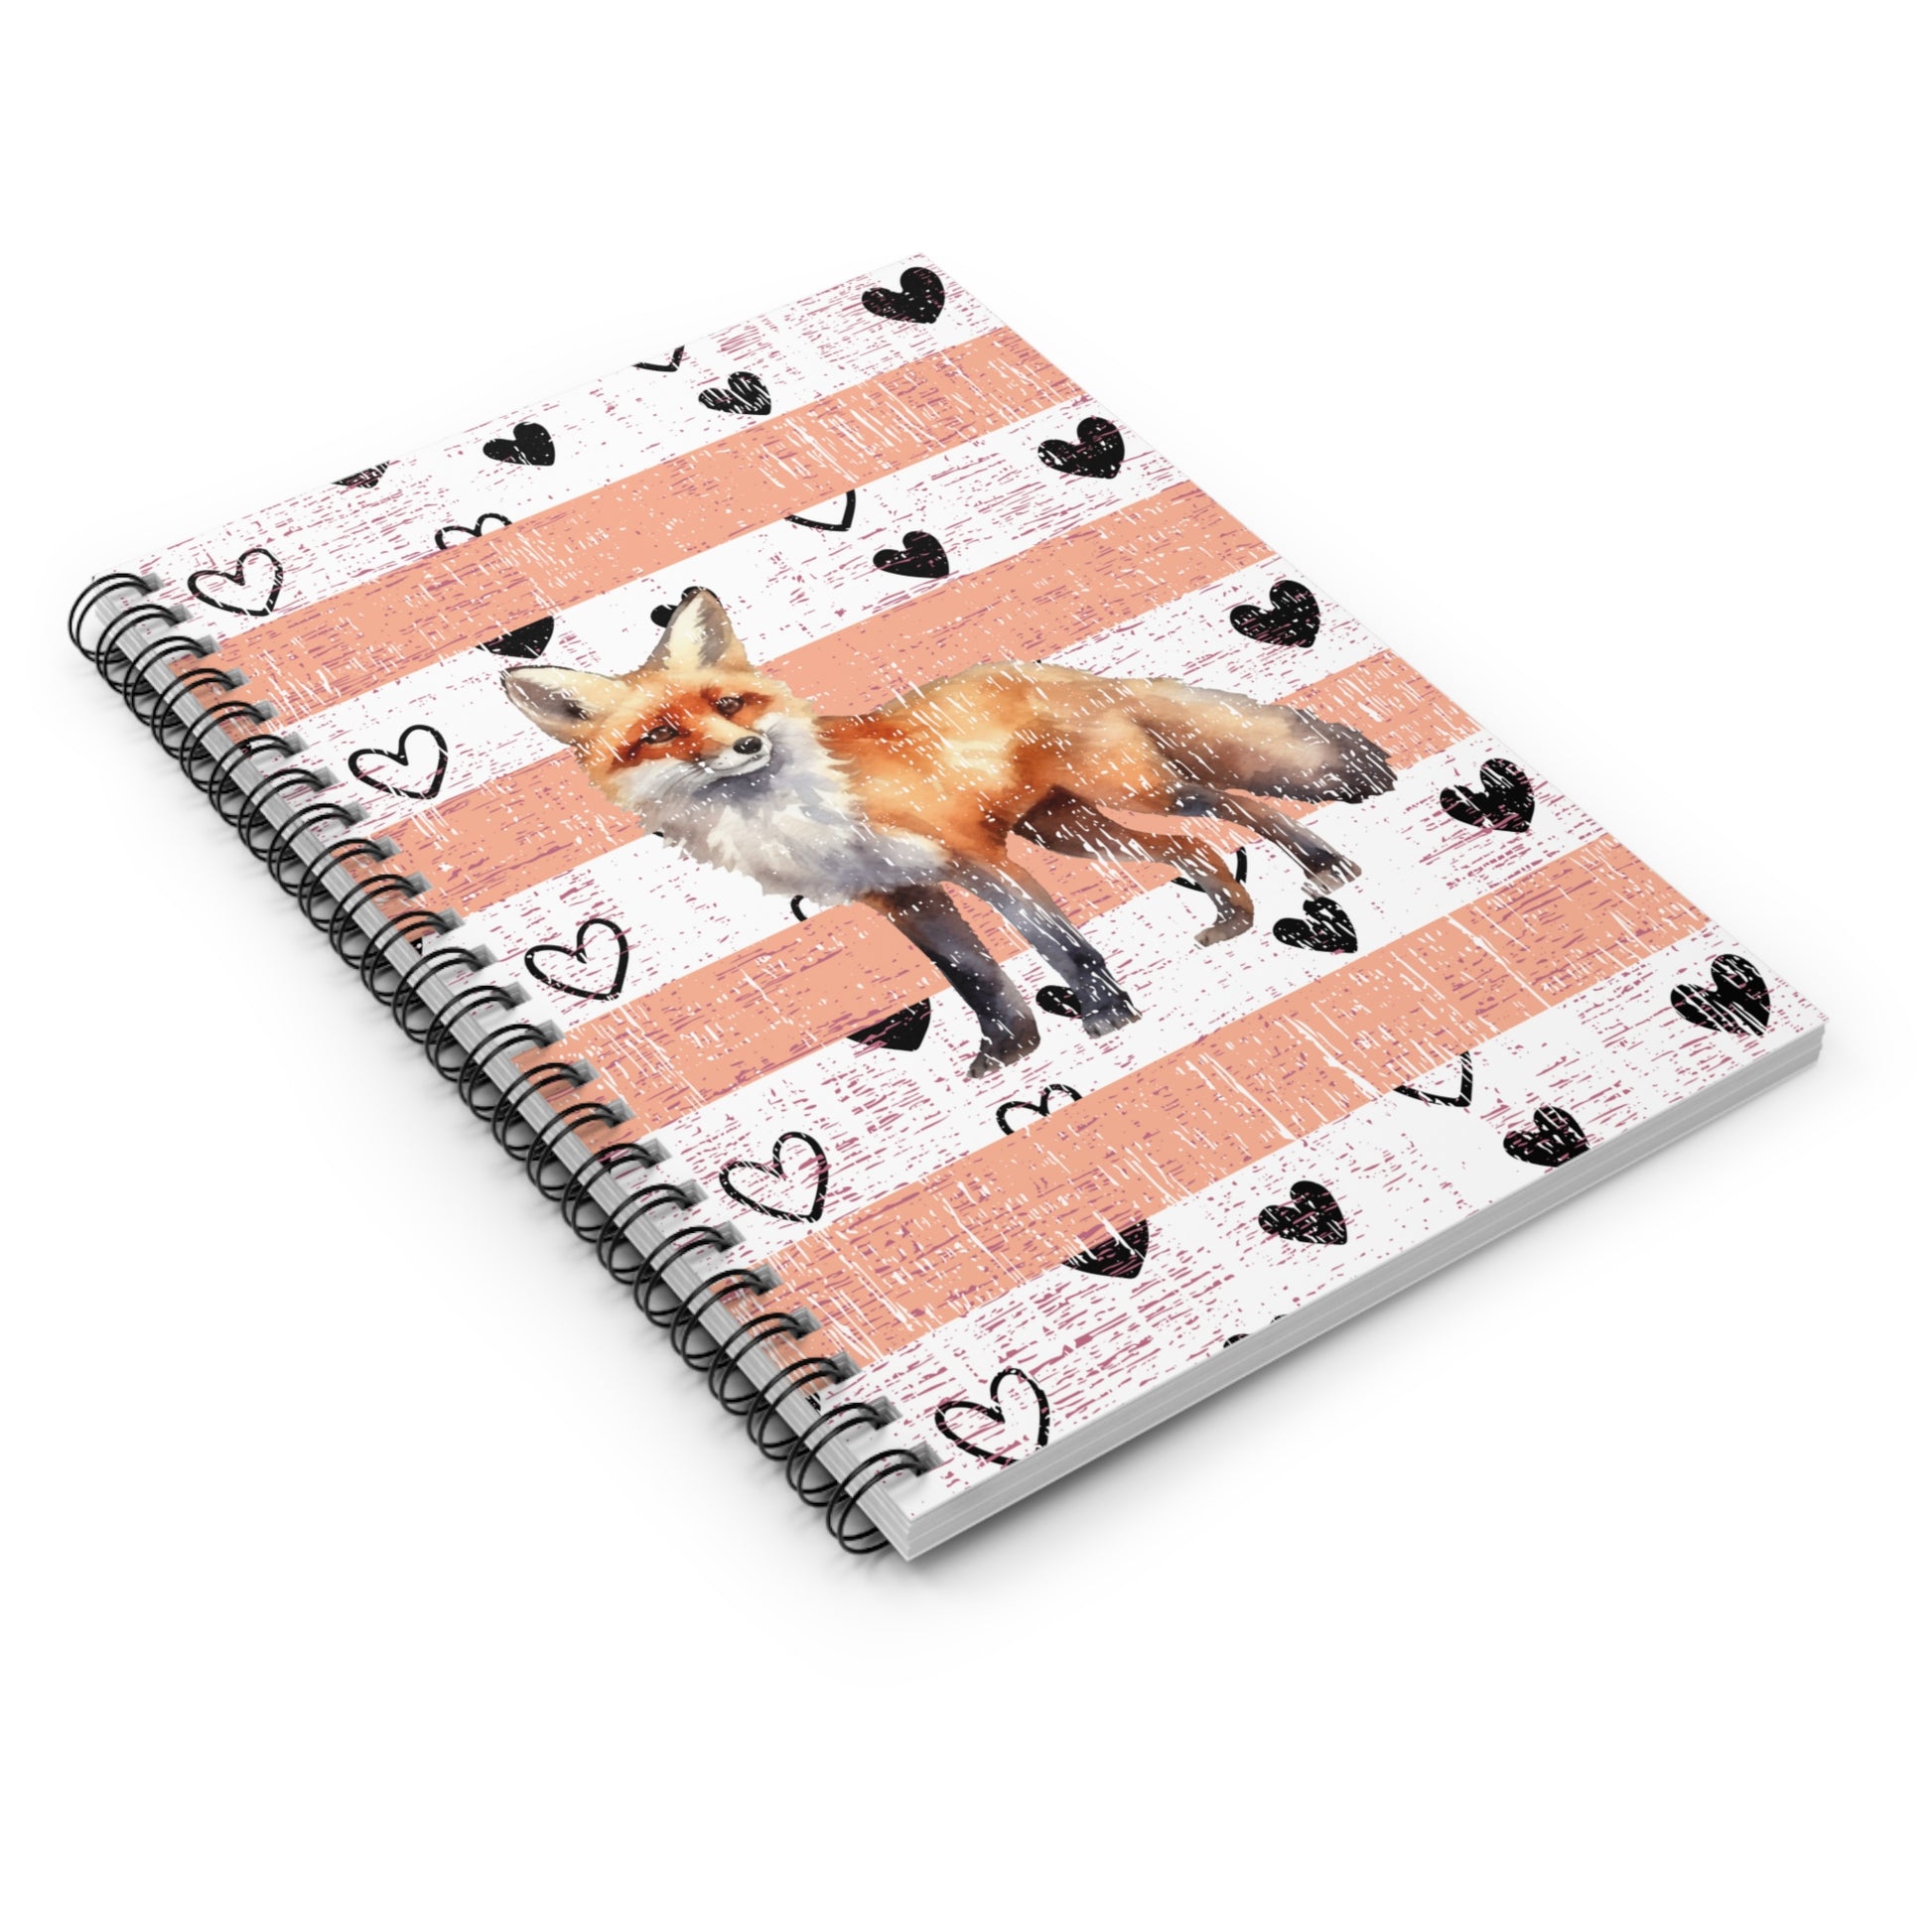 Foxy Whimsy: Ruled Spiral Notebook with Decorative Fox Cover Design - Eddy and Rita